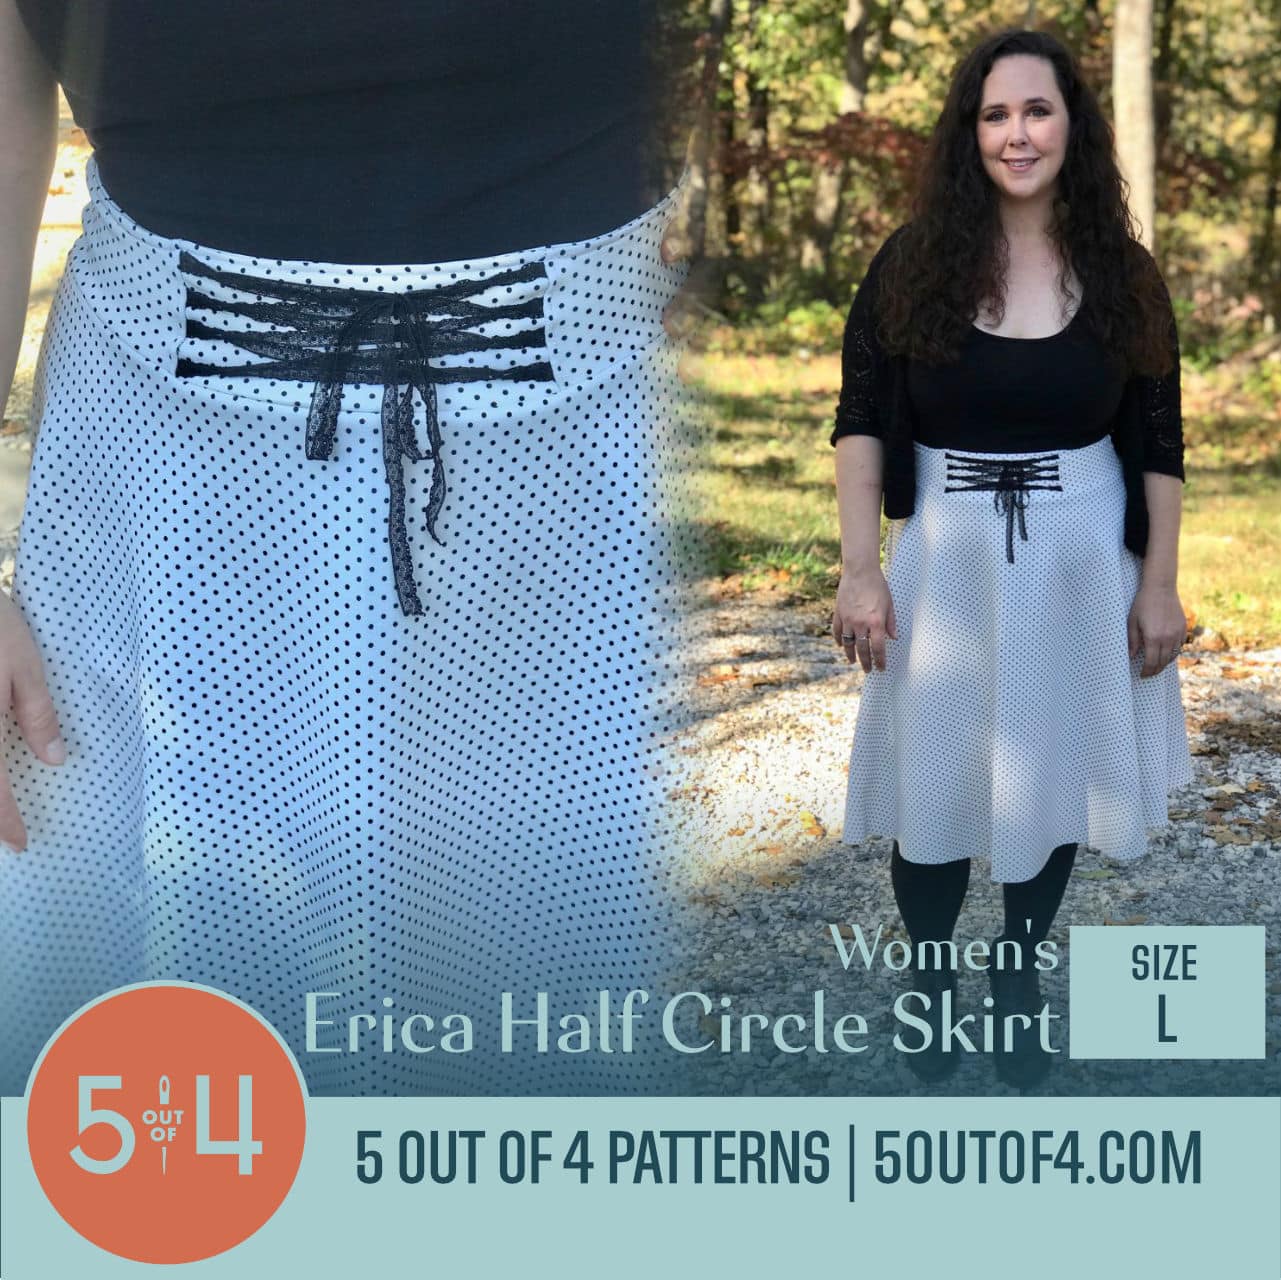 5 out of 4 Women's Erica Half Circle Skirt PDF Pattern Instant Download